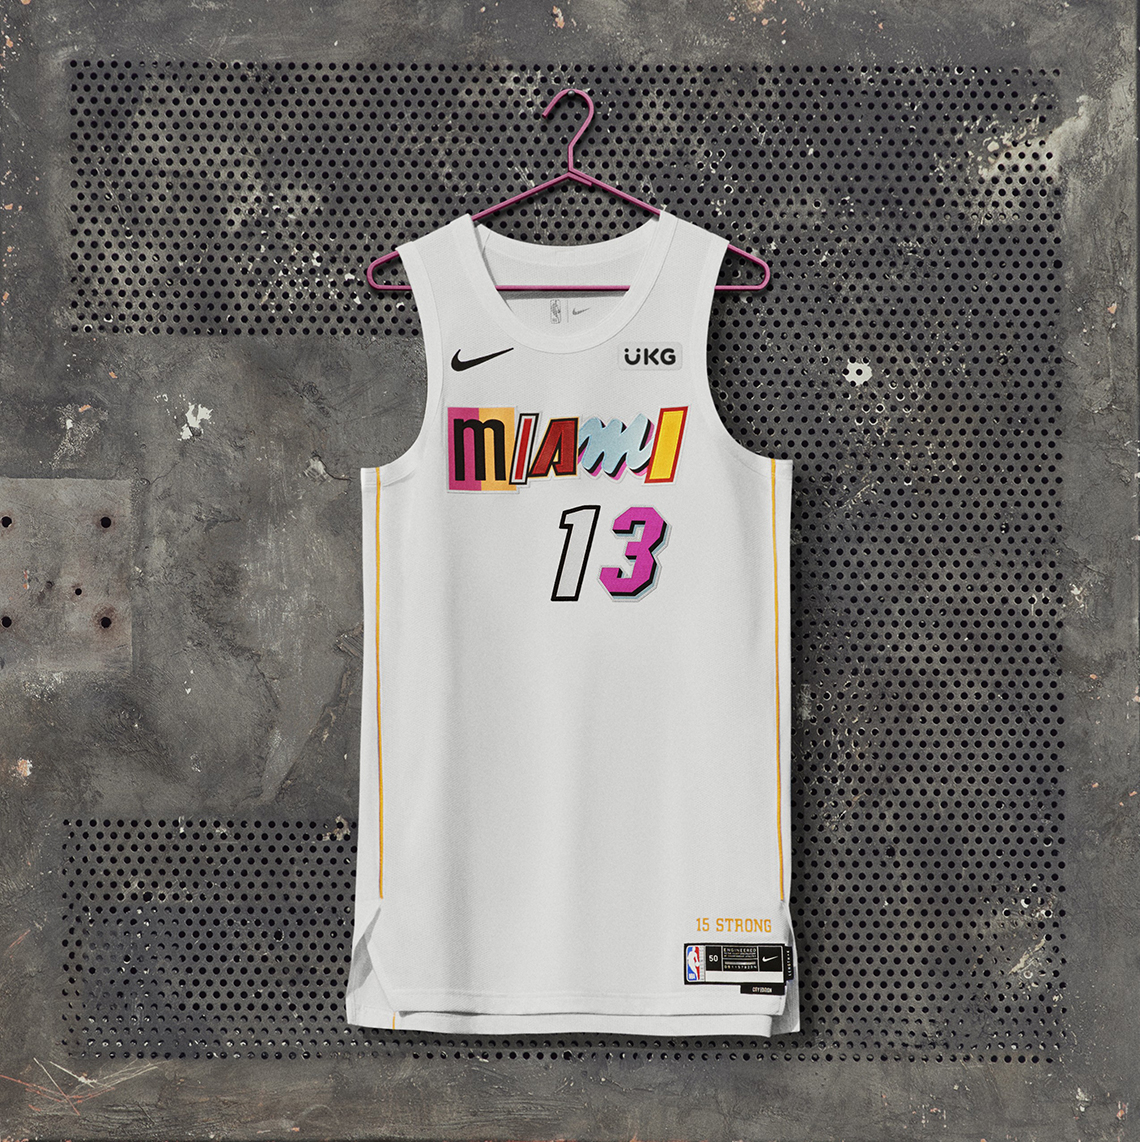 Jersey leak: Heat Culture coming to new Miami Heat City Edition jerseys